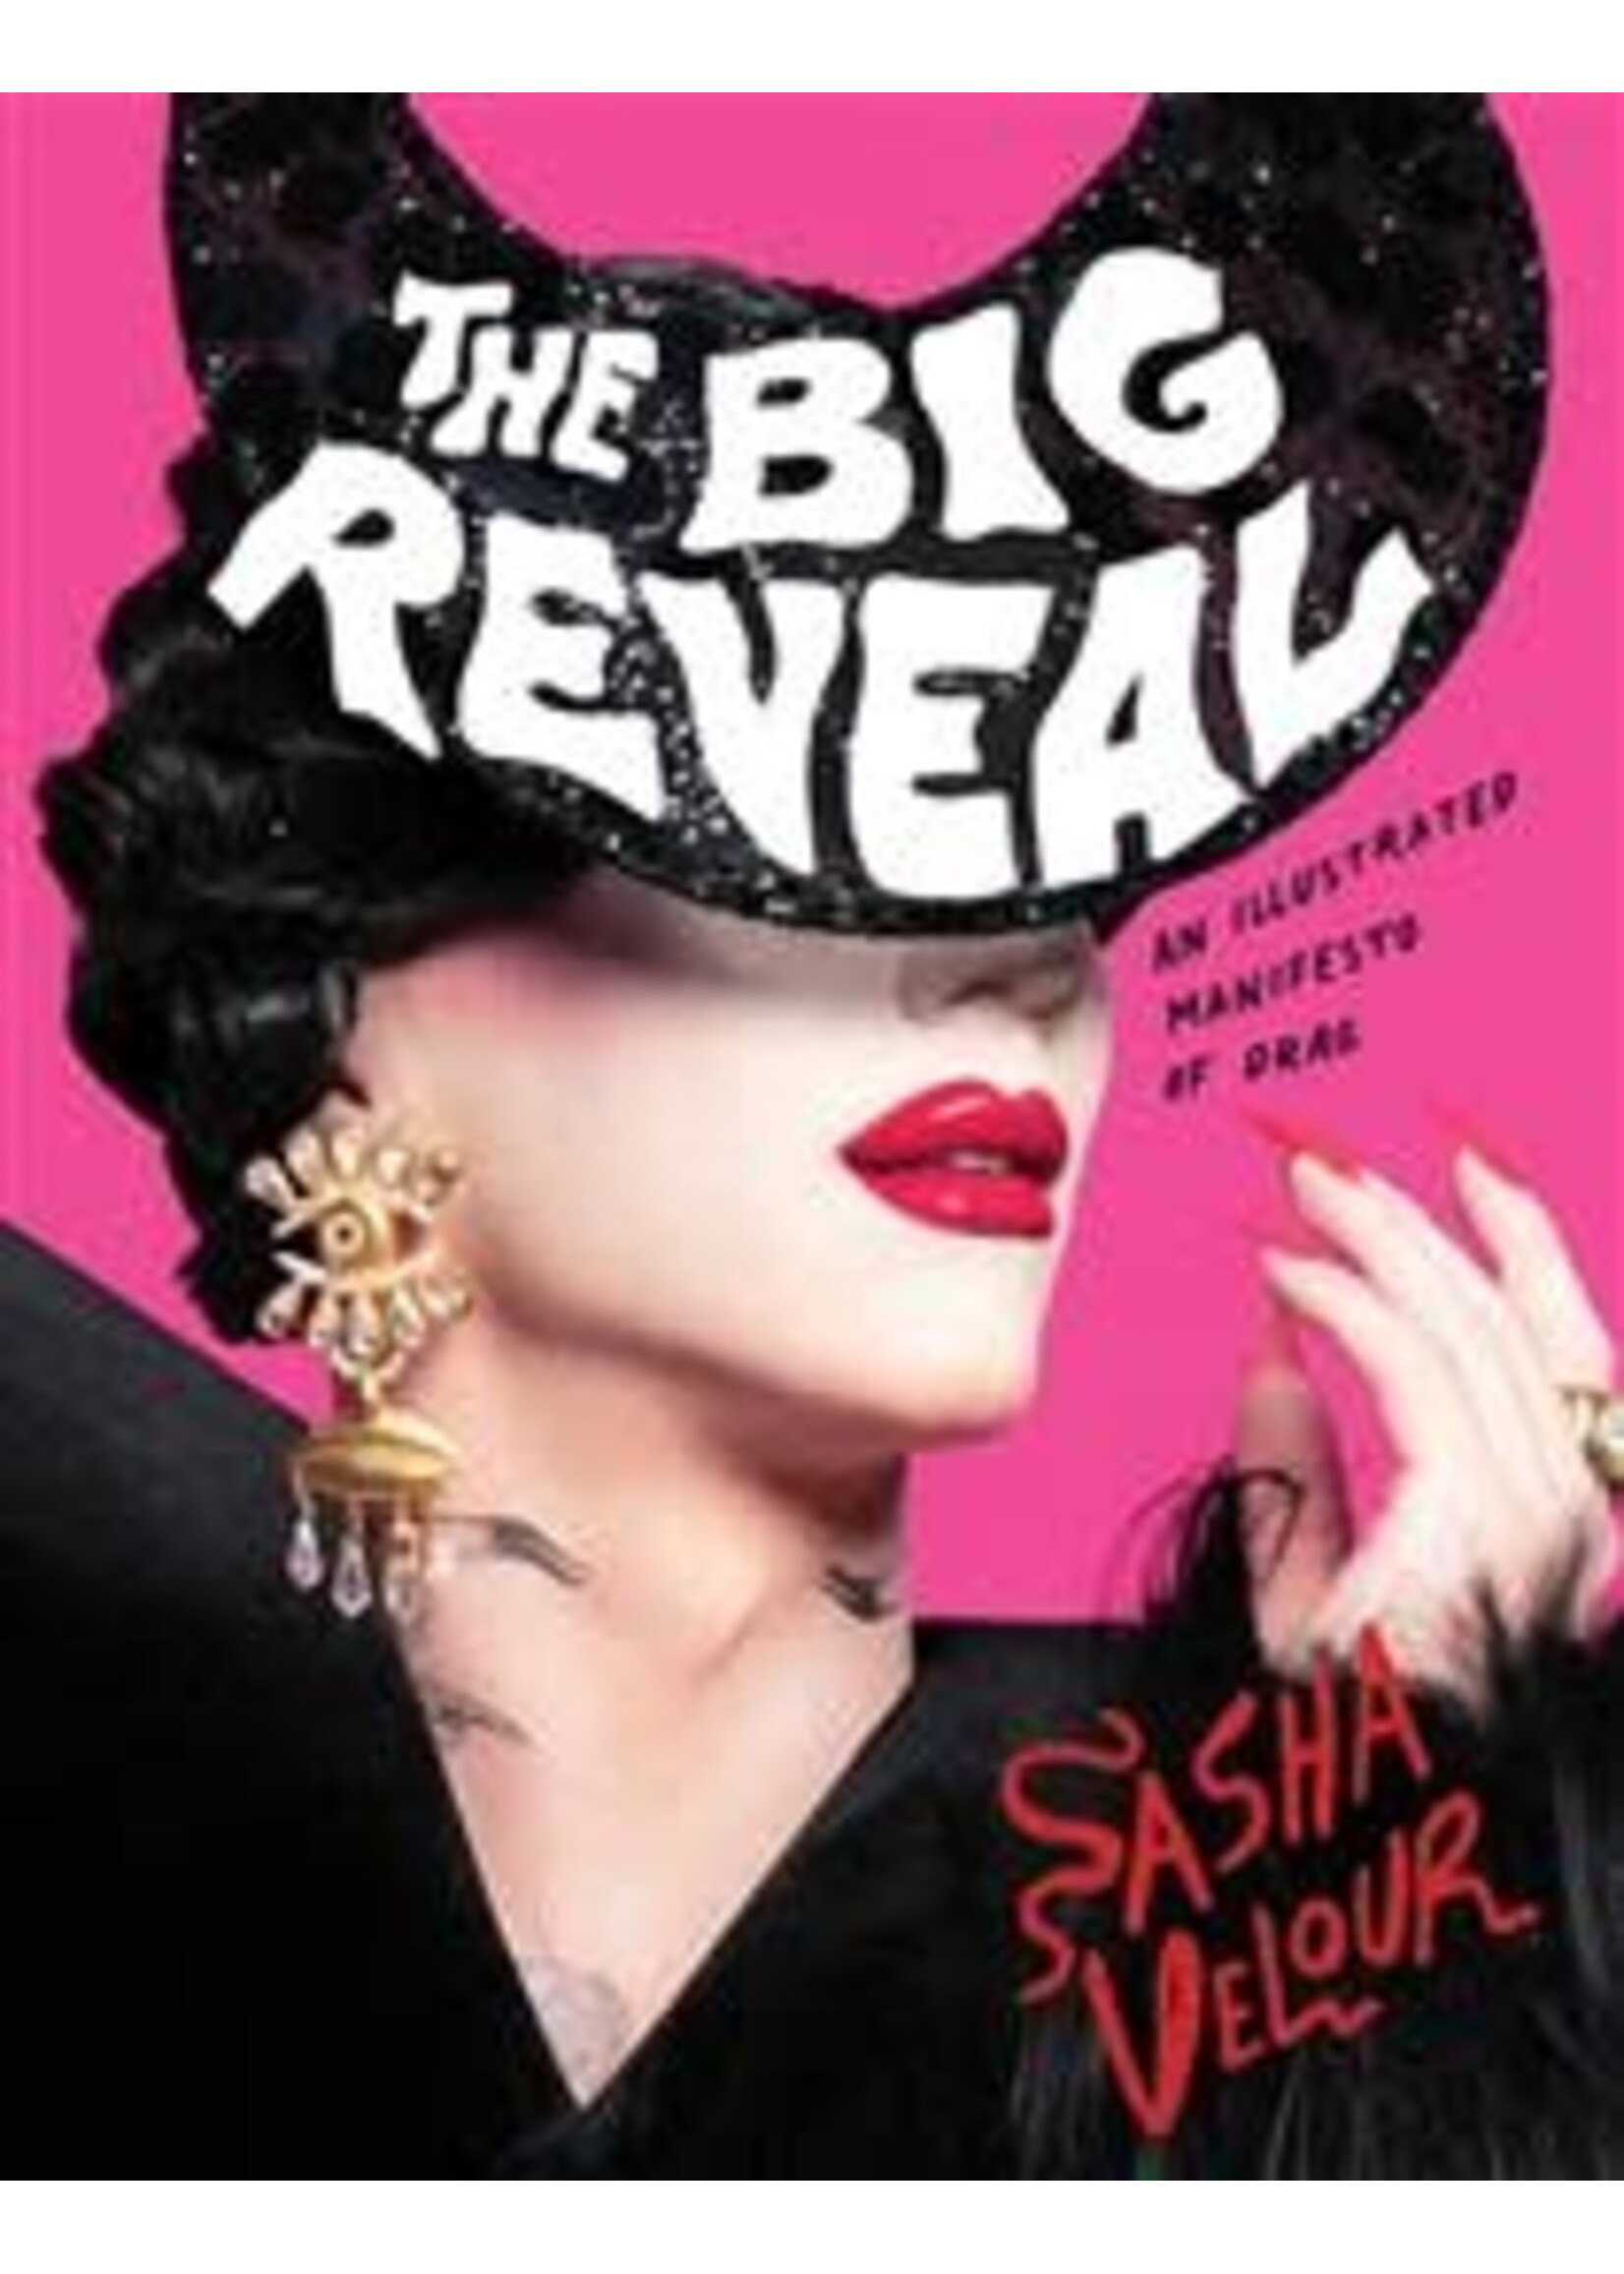 The Big Reveal: An Illustrated Manifesto of Drag by Sasha Velour